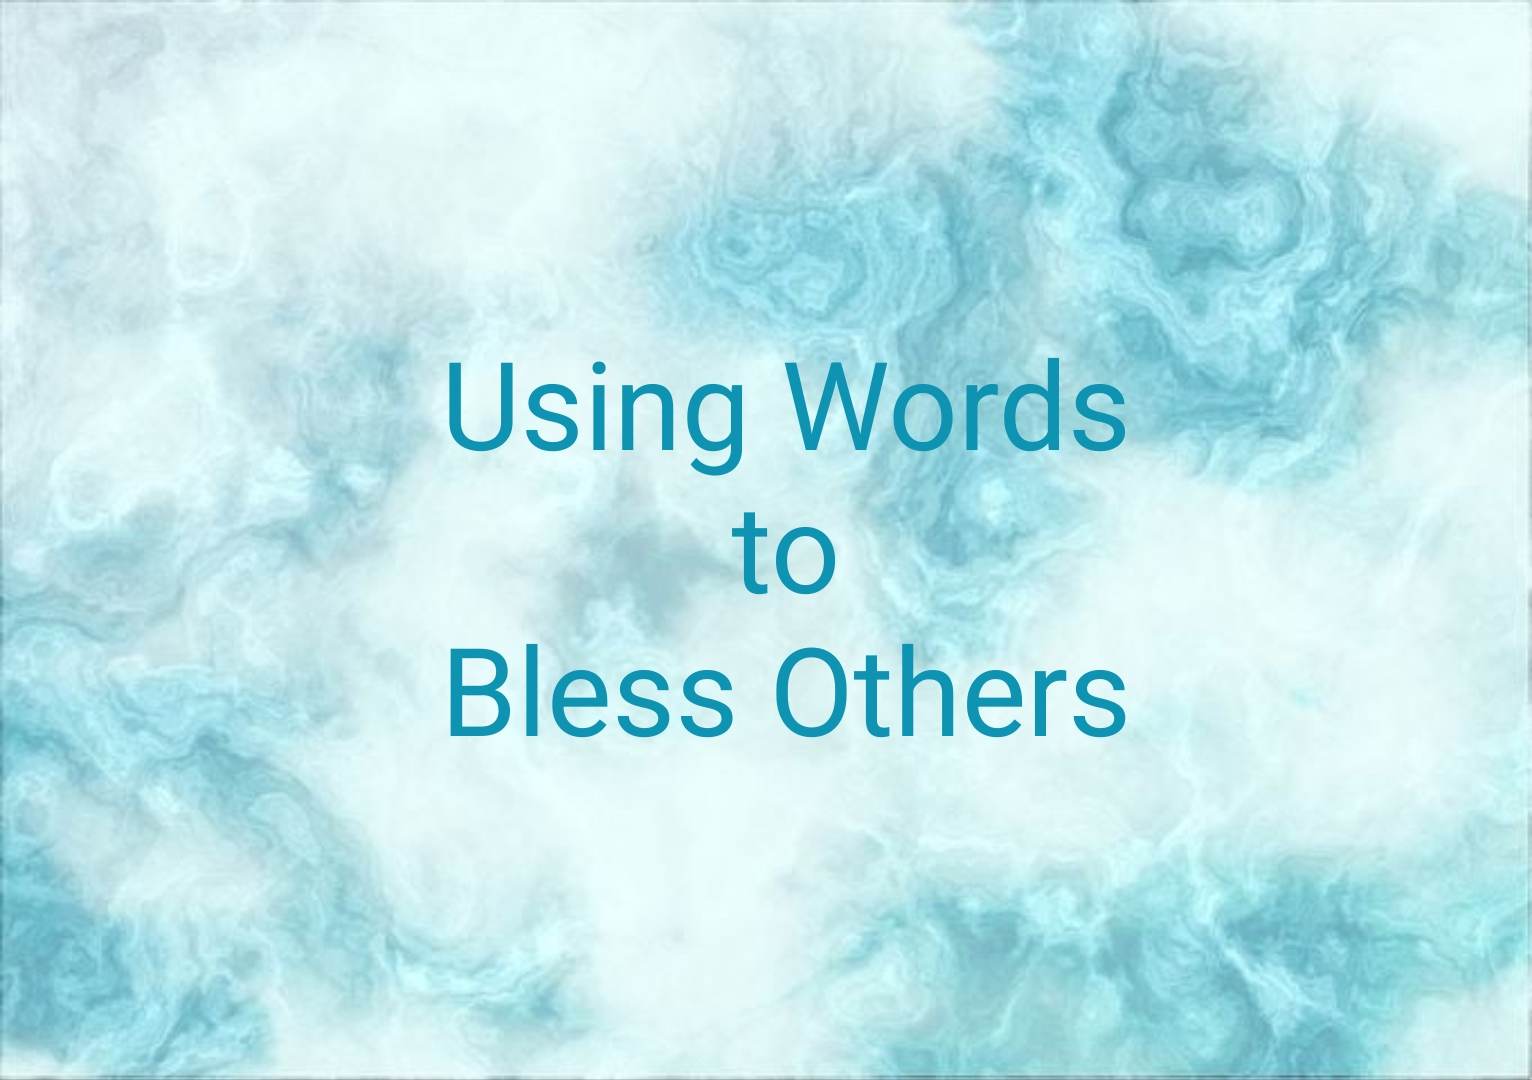 This is a picture of a blue background with the words: Using Words to Bless Others